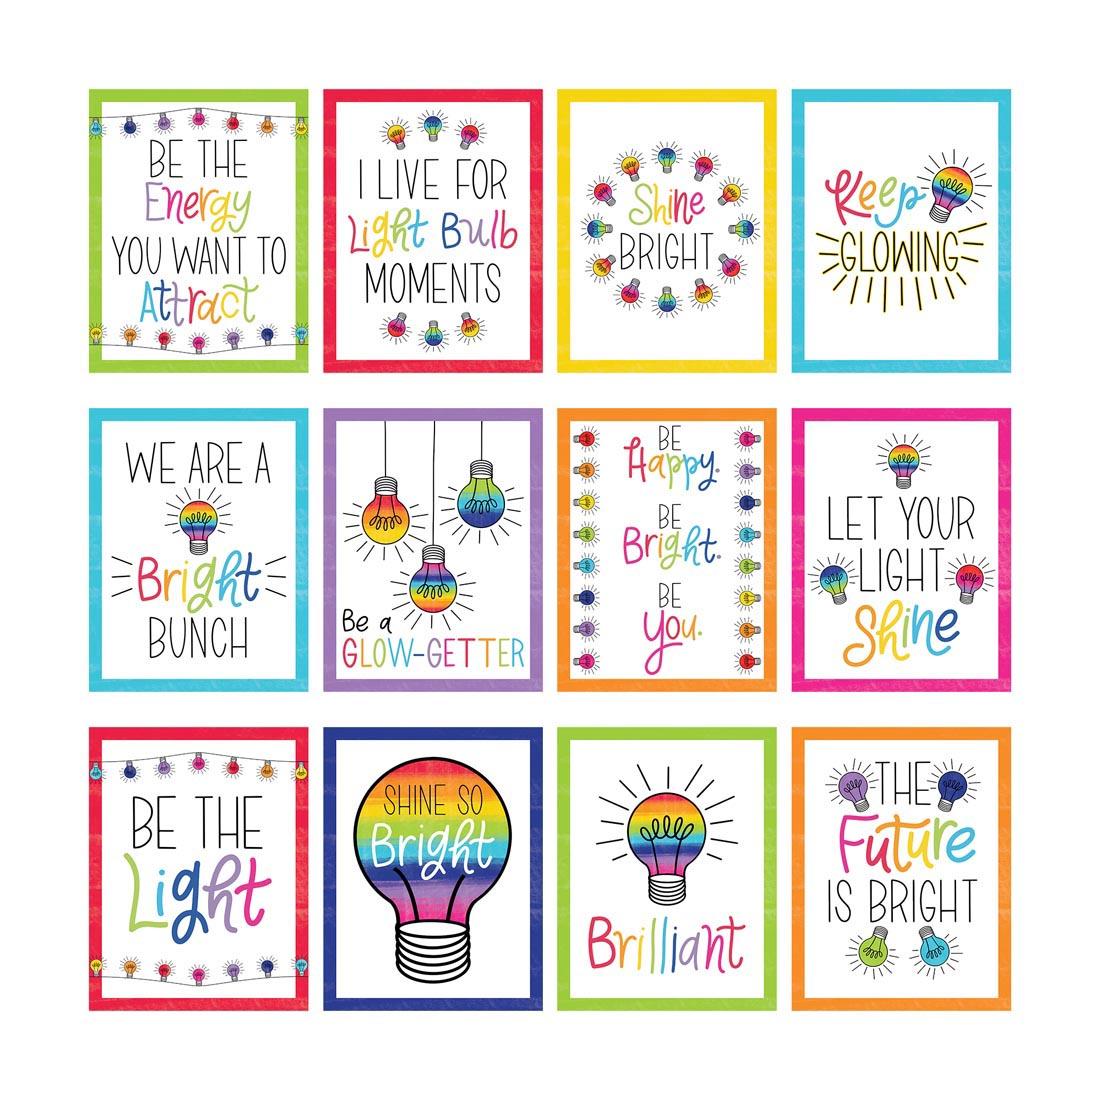 Light Bulb Moments Mini Posters Set By Carson Dellosa featuring colorful images of lightbulbs and positive sayings